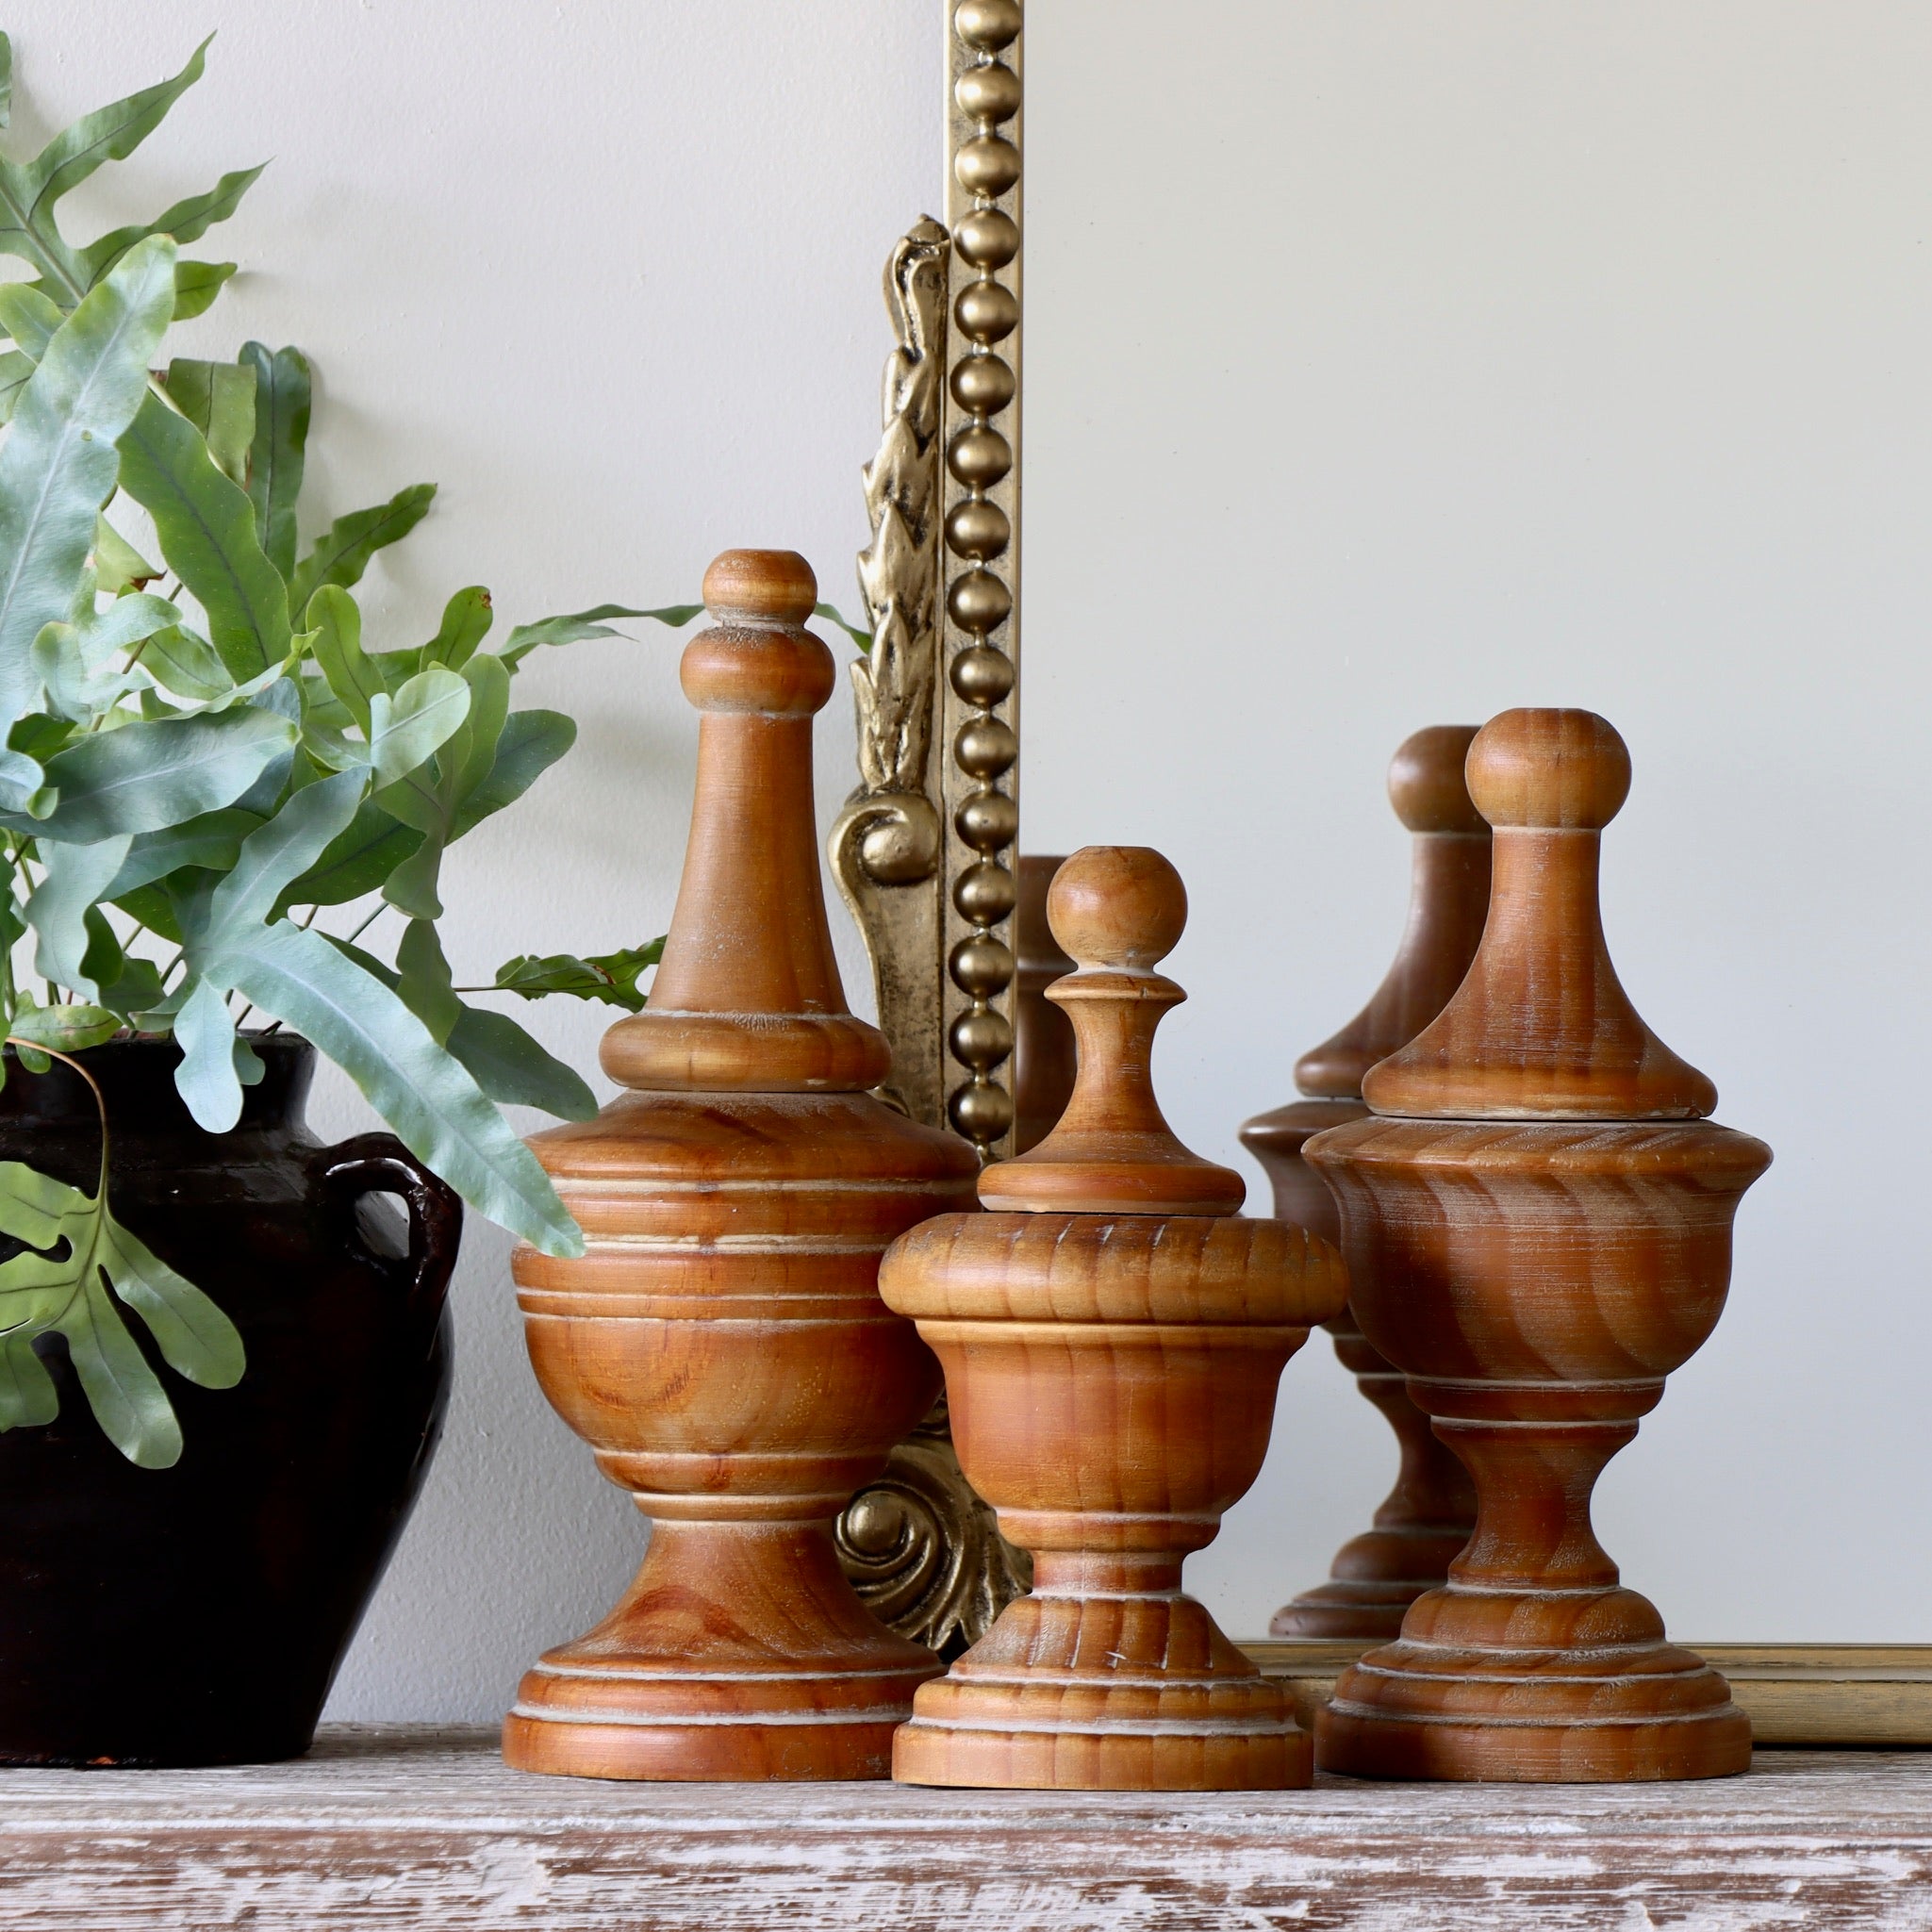 Carved Wood Finials